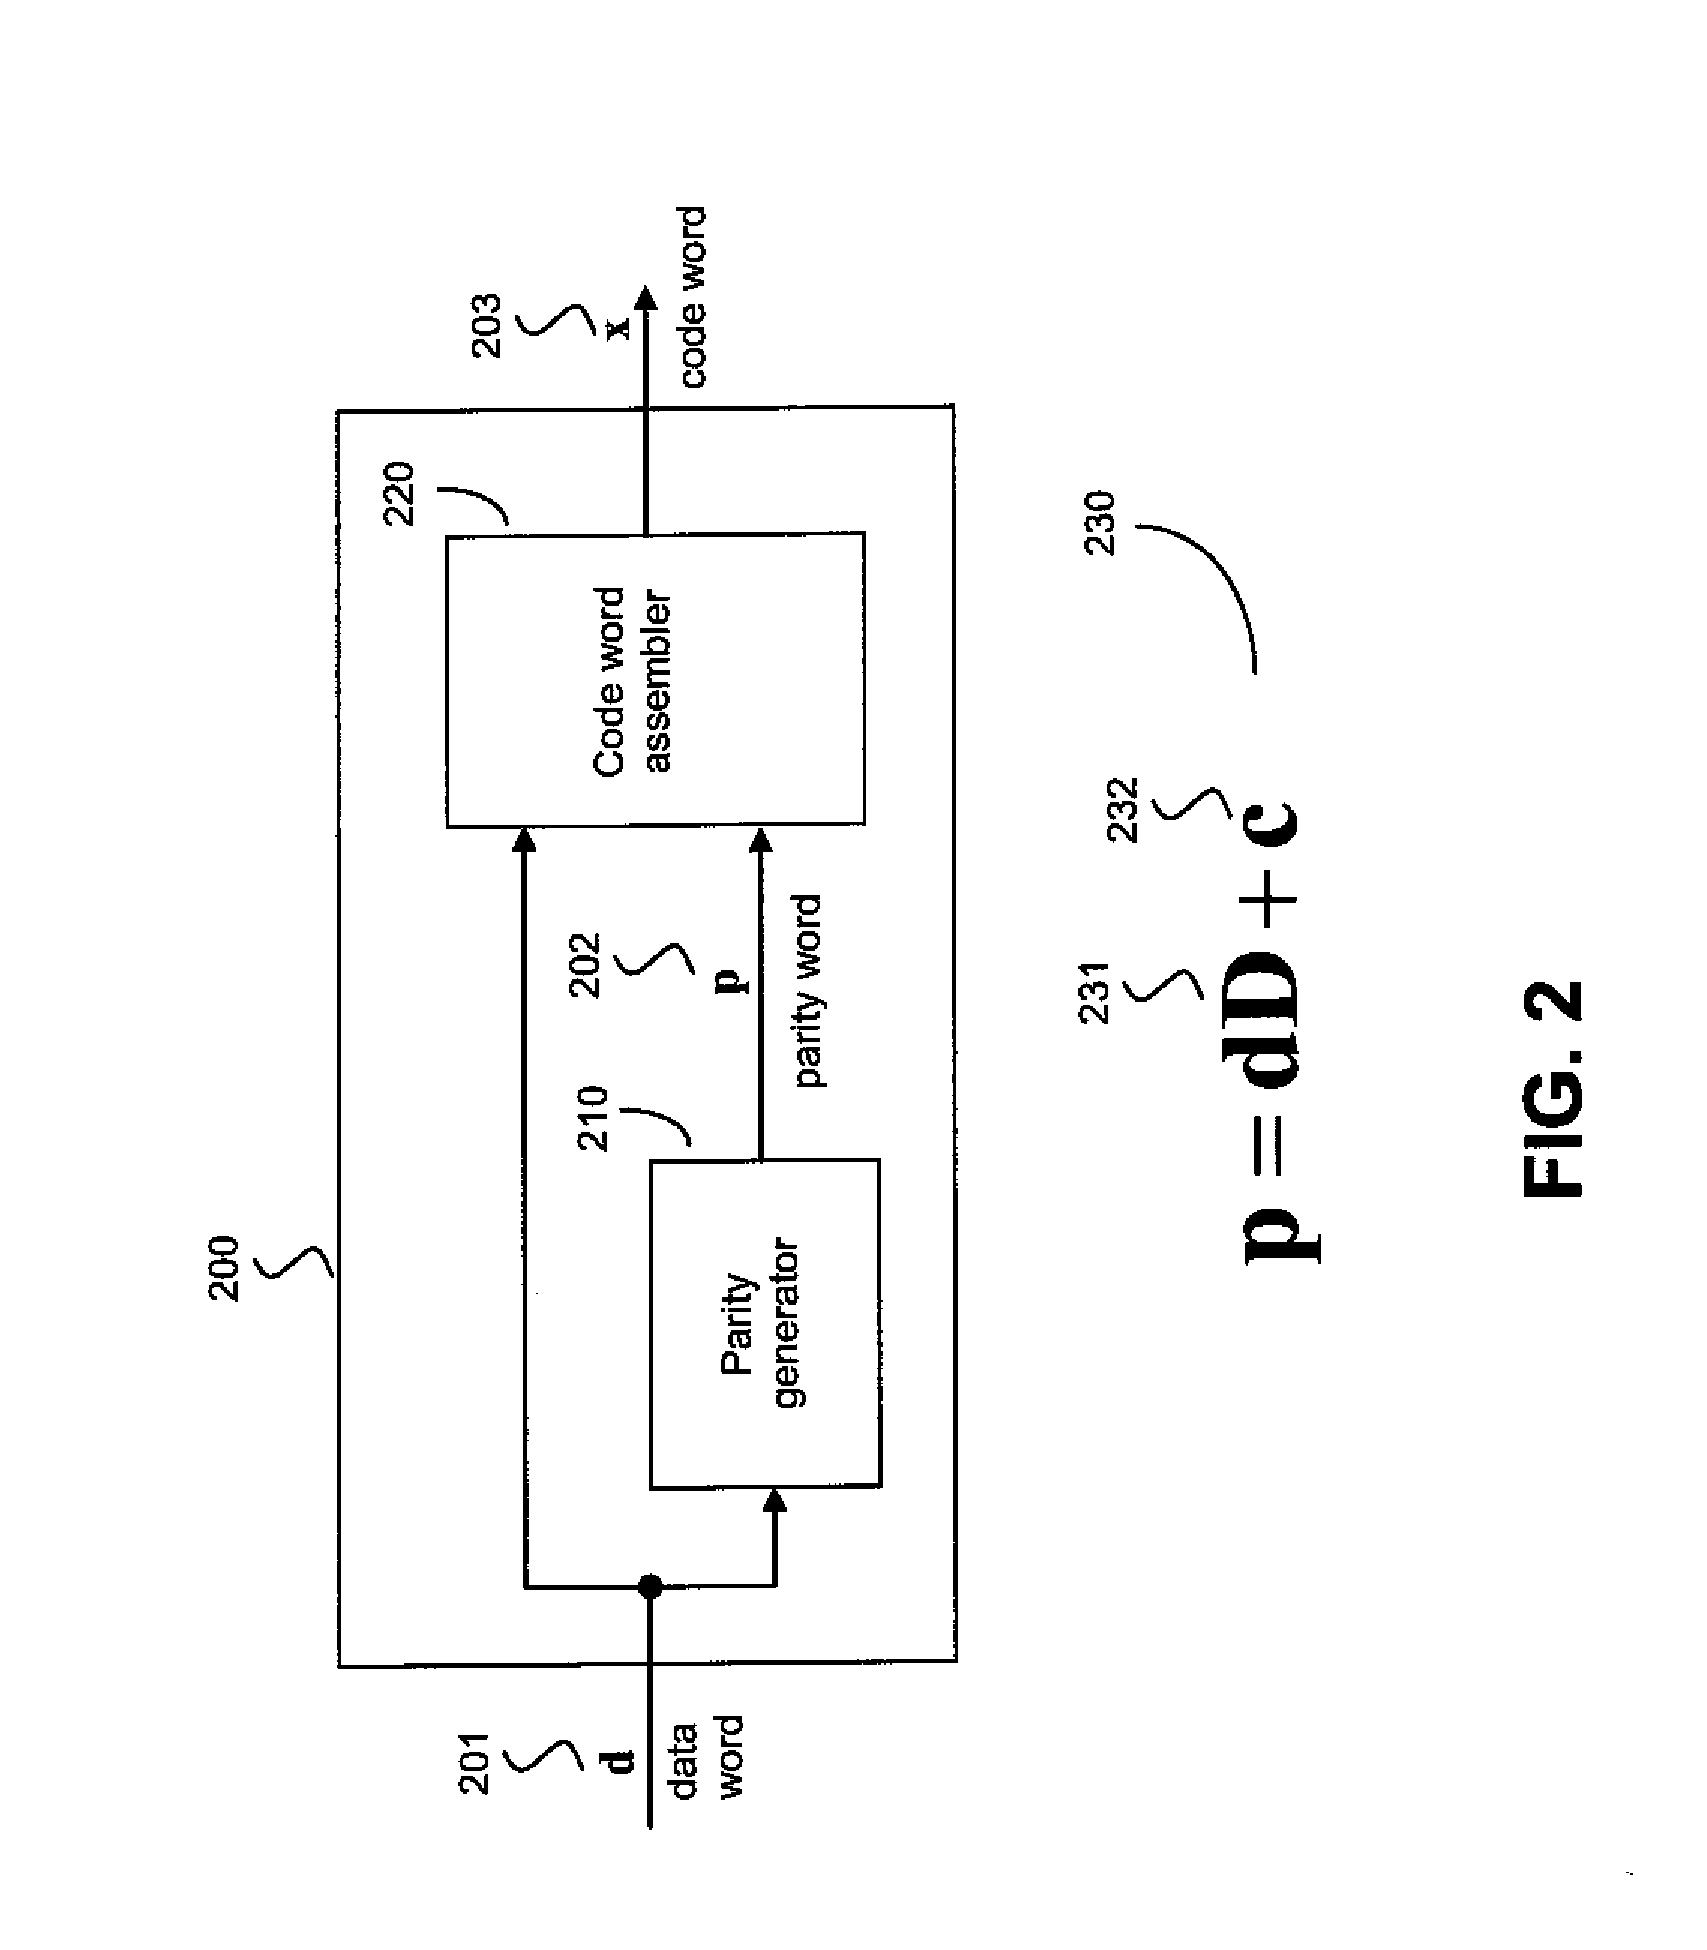 Method and system for error correction in transmitting data using low complexity systematic encoder